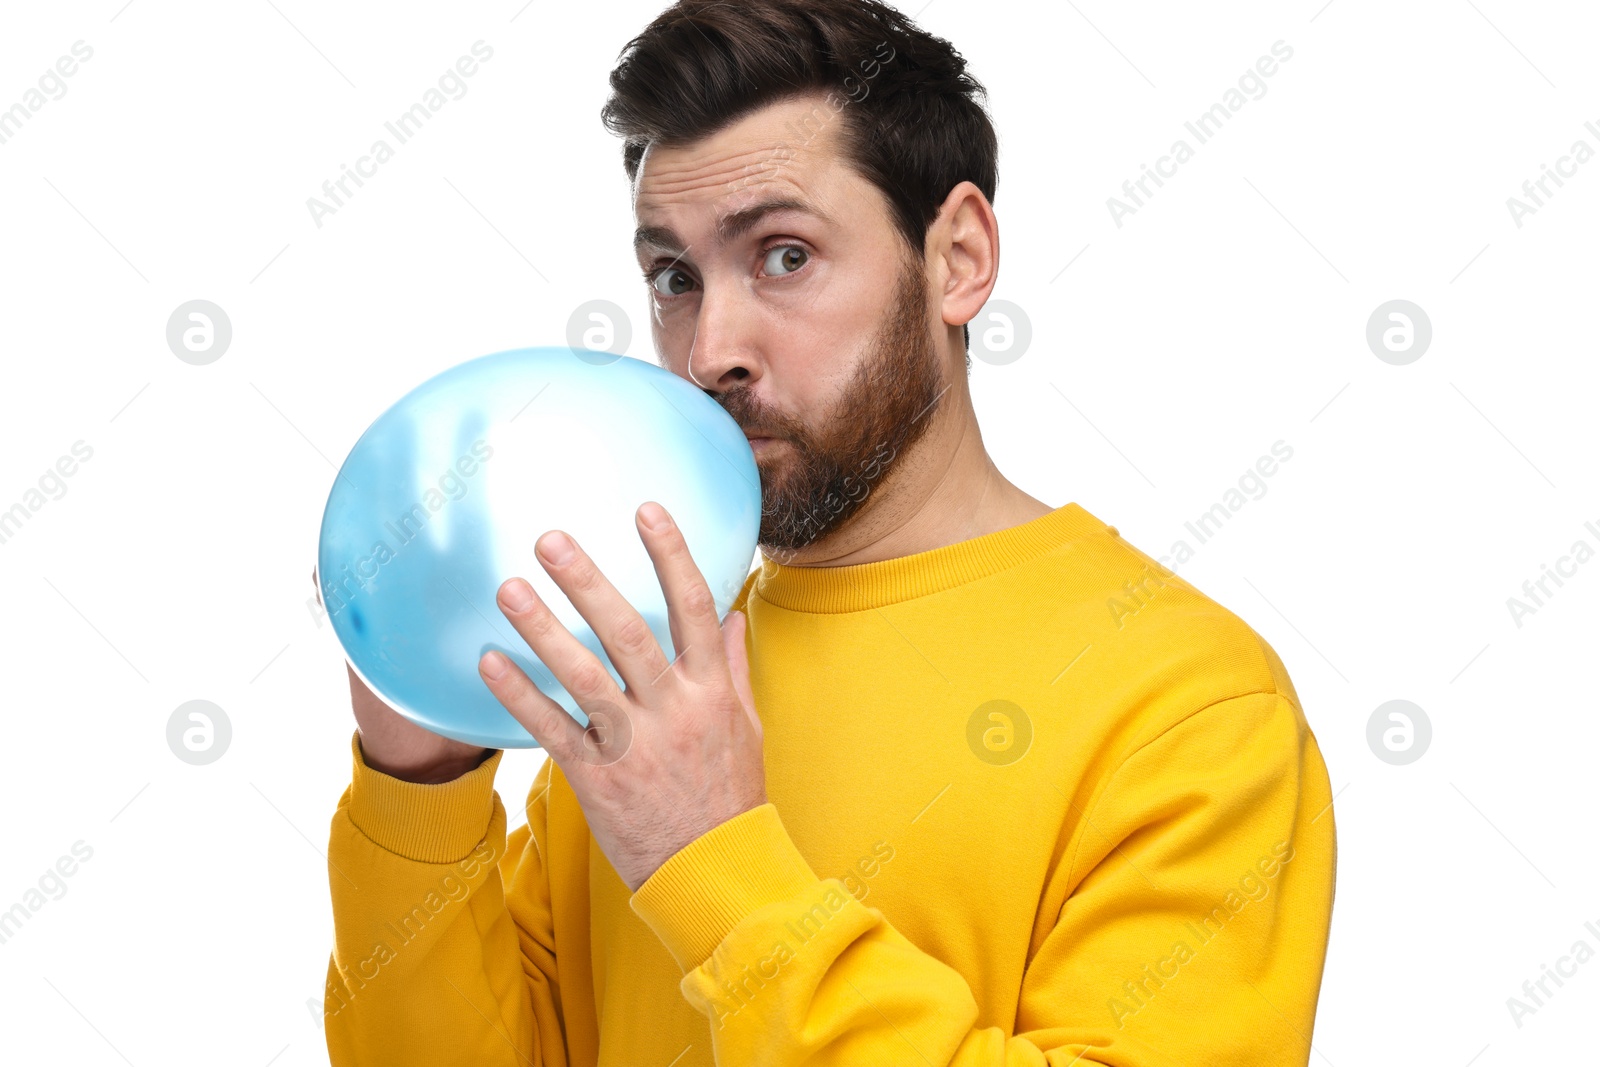 Photo of Man inflating light blue balloon on white background